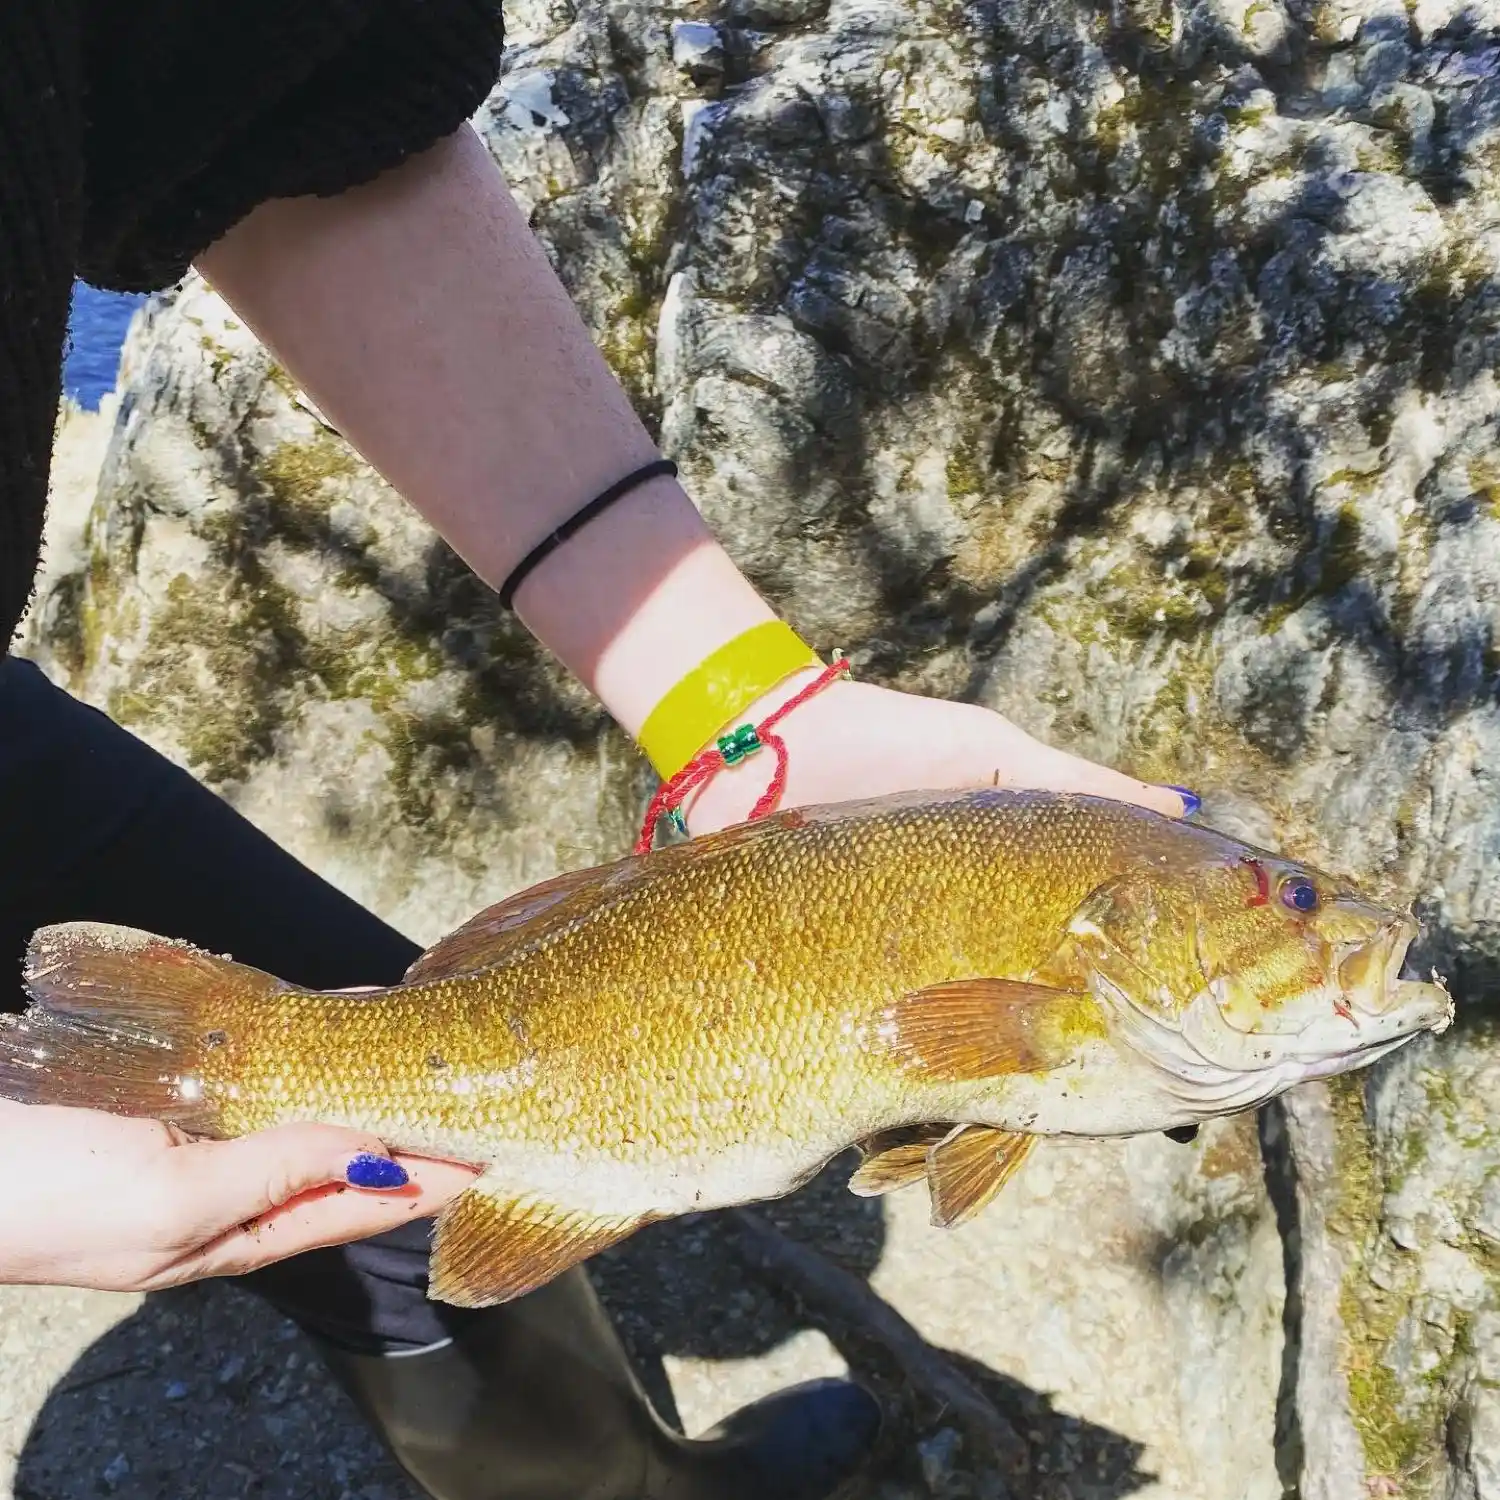 Fishing report: Anglers catching smallmouth bass, rainbow trout in